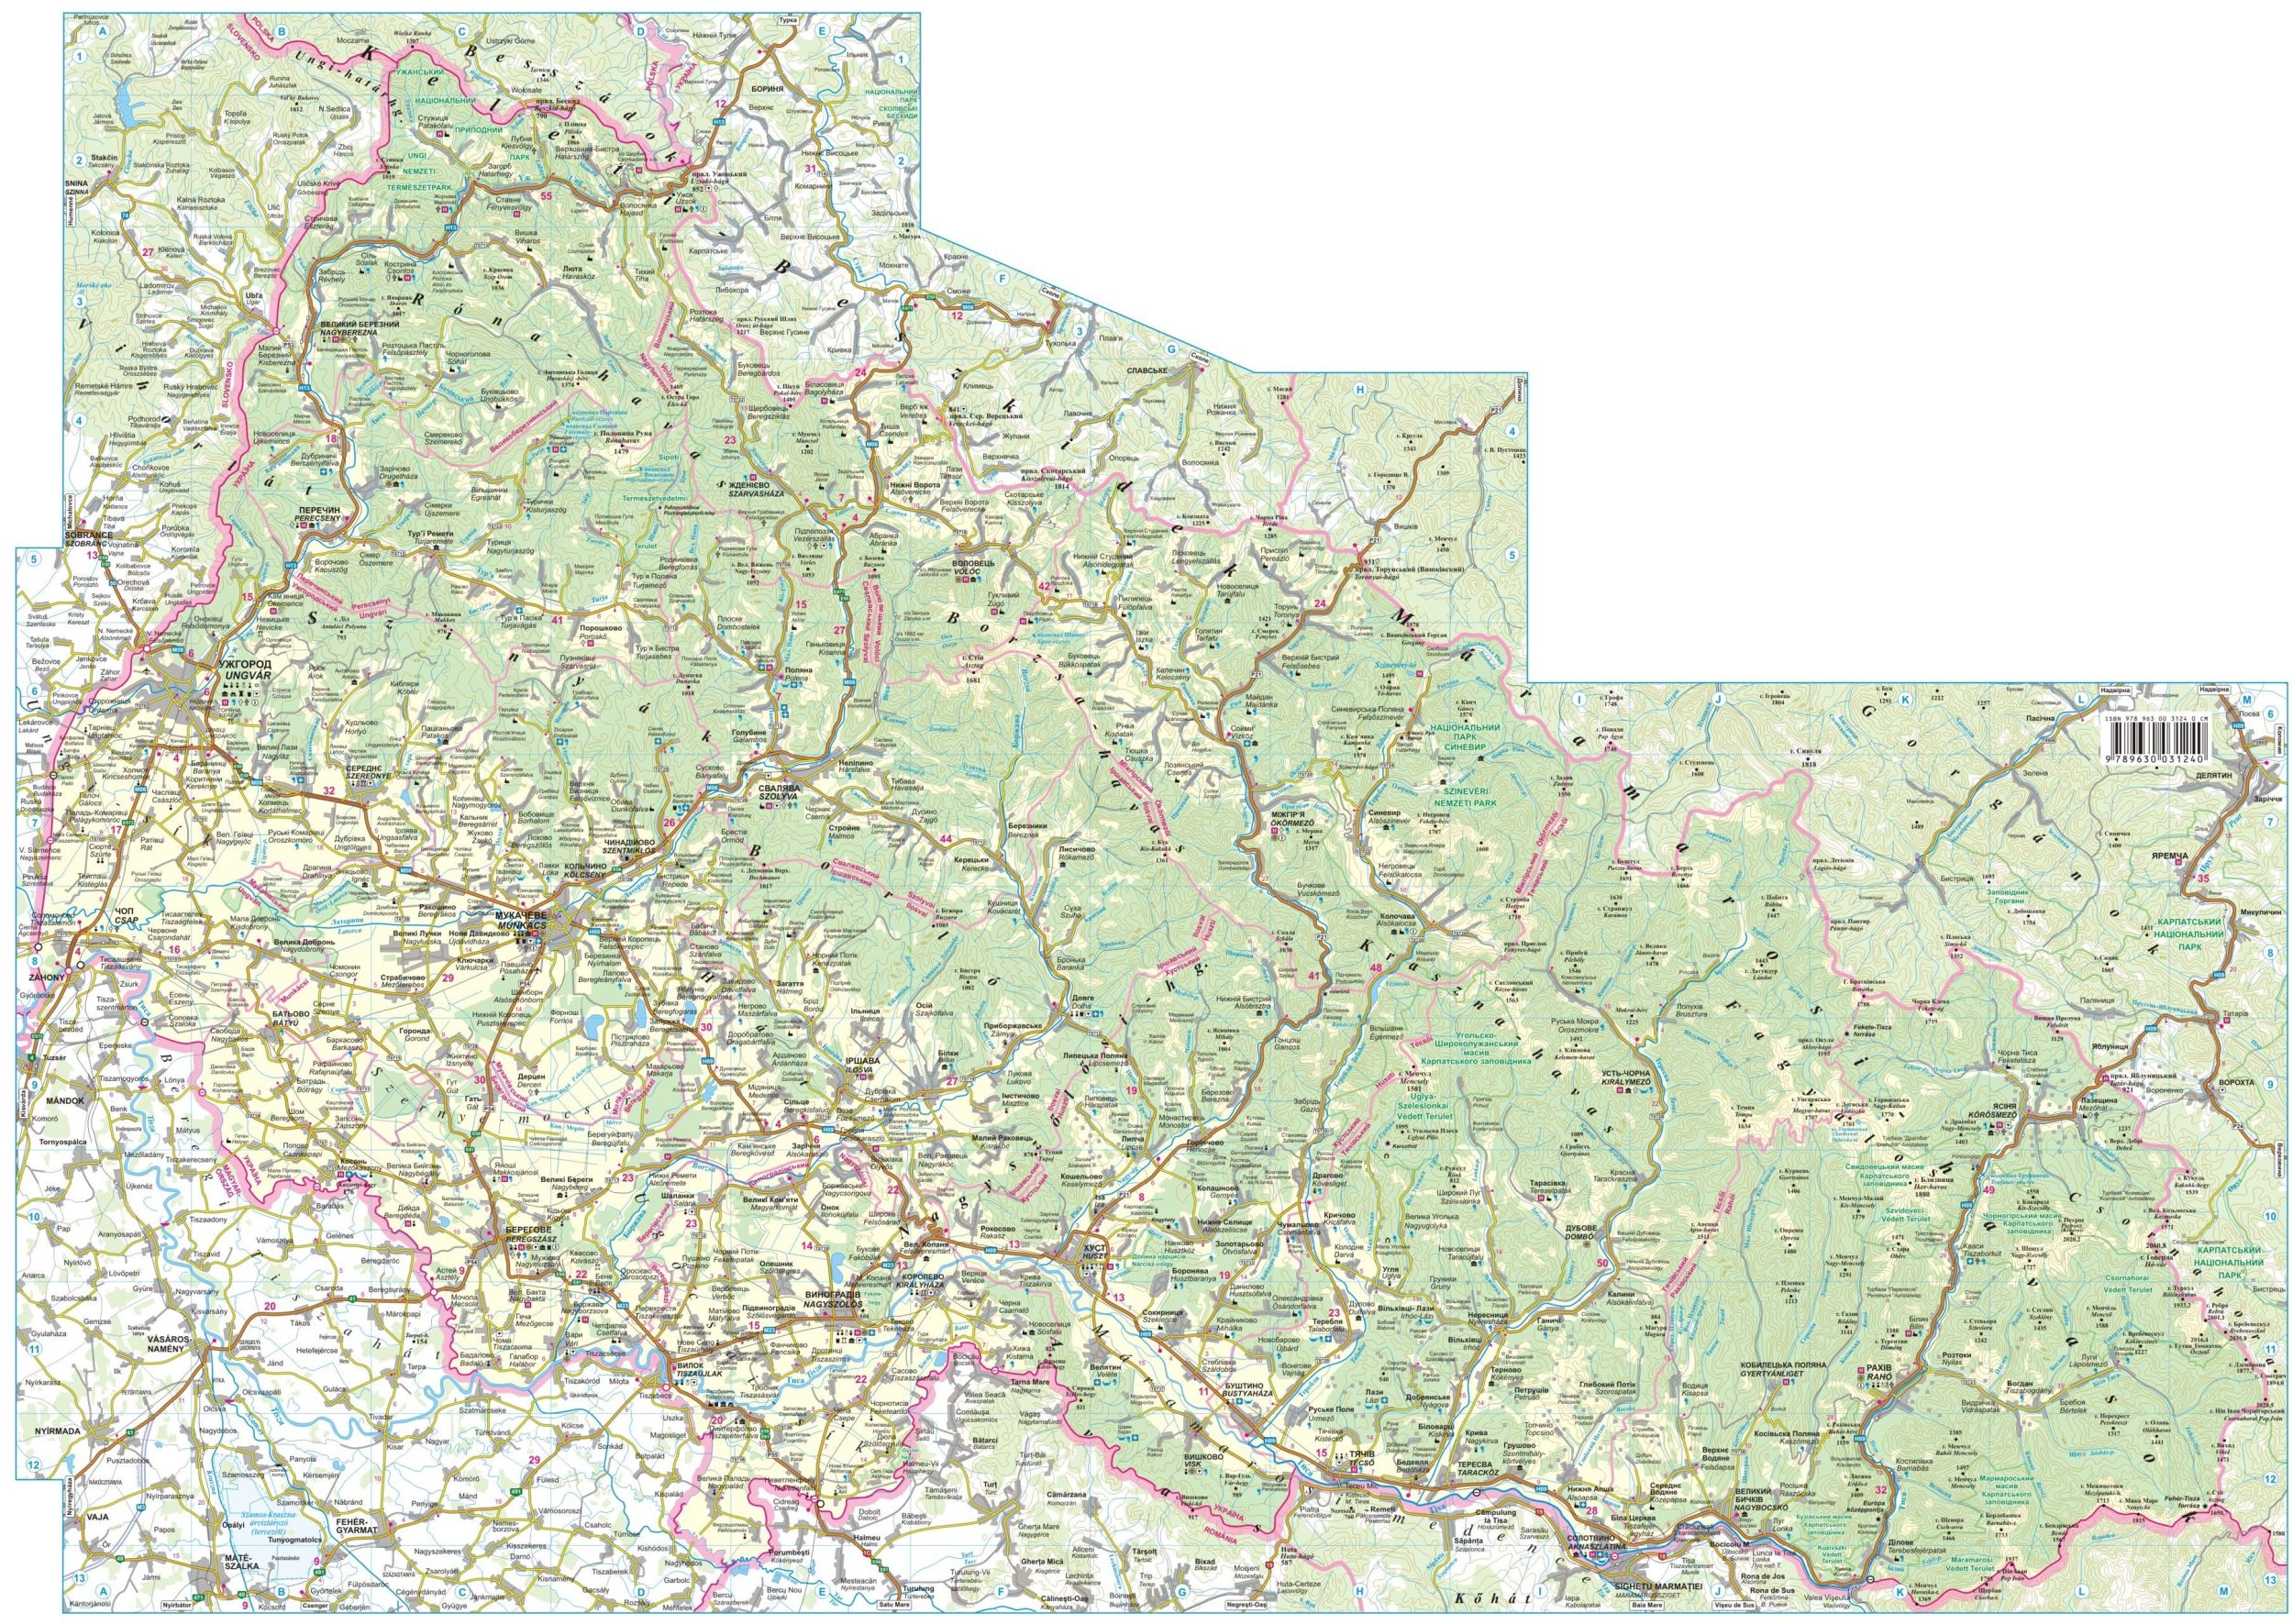 Area covered by Transcarpathia 1:250.000